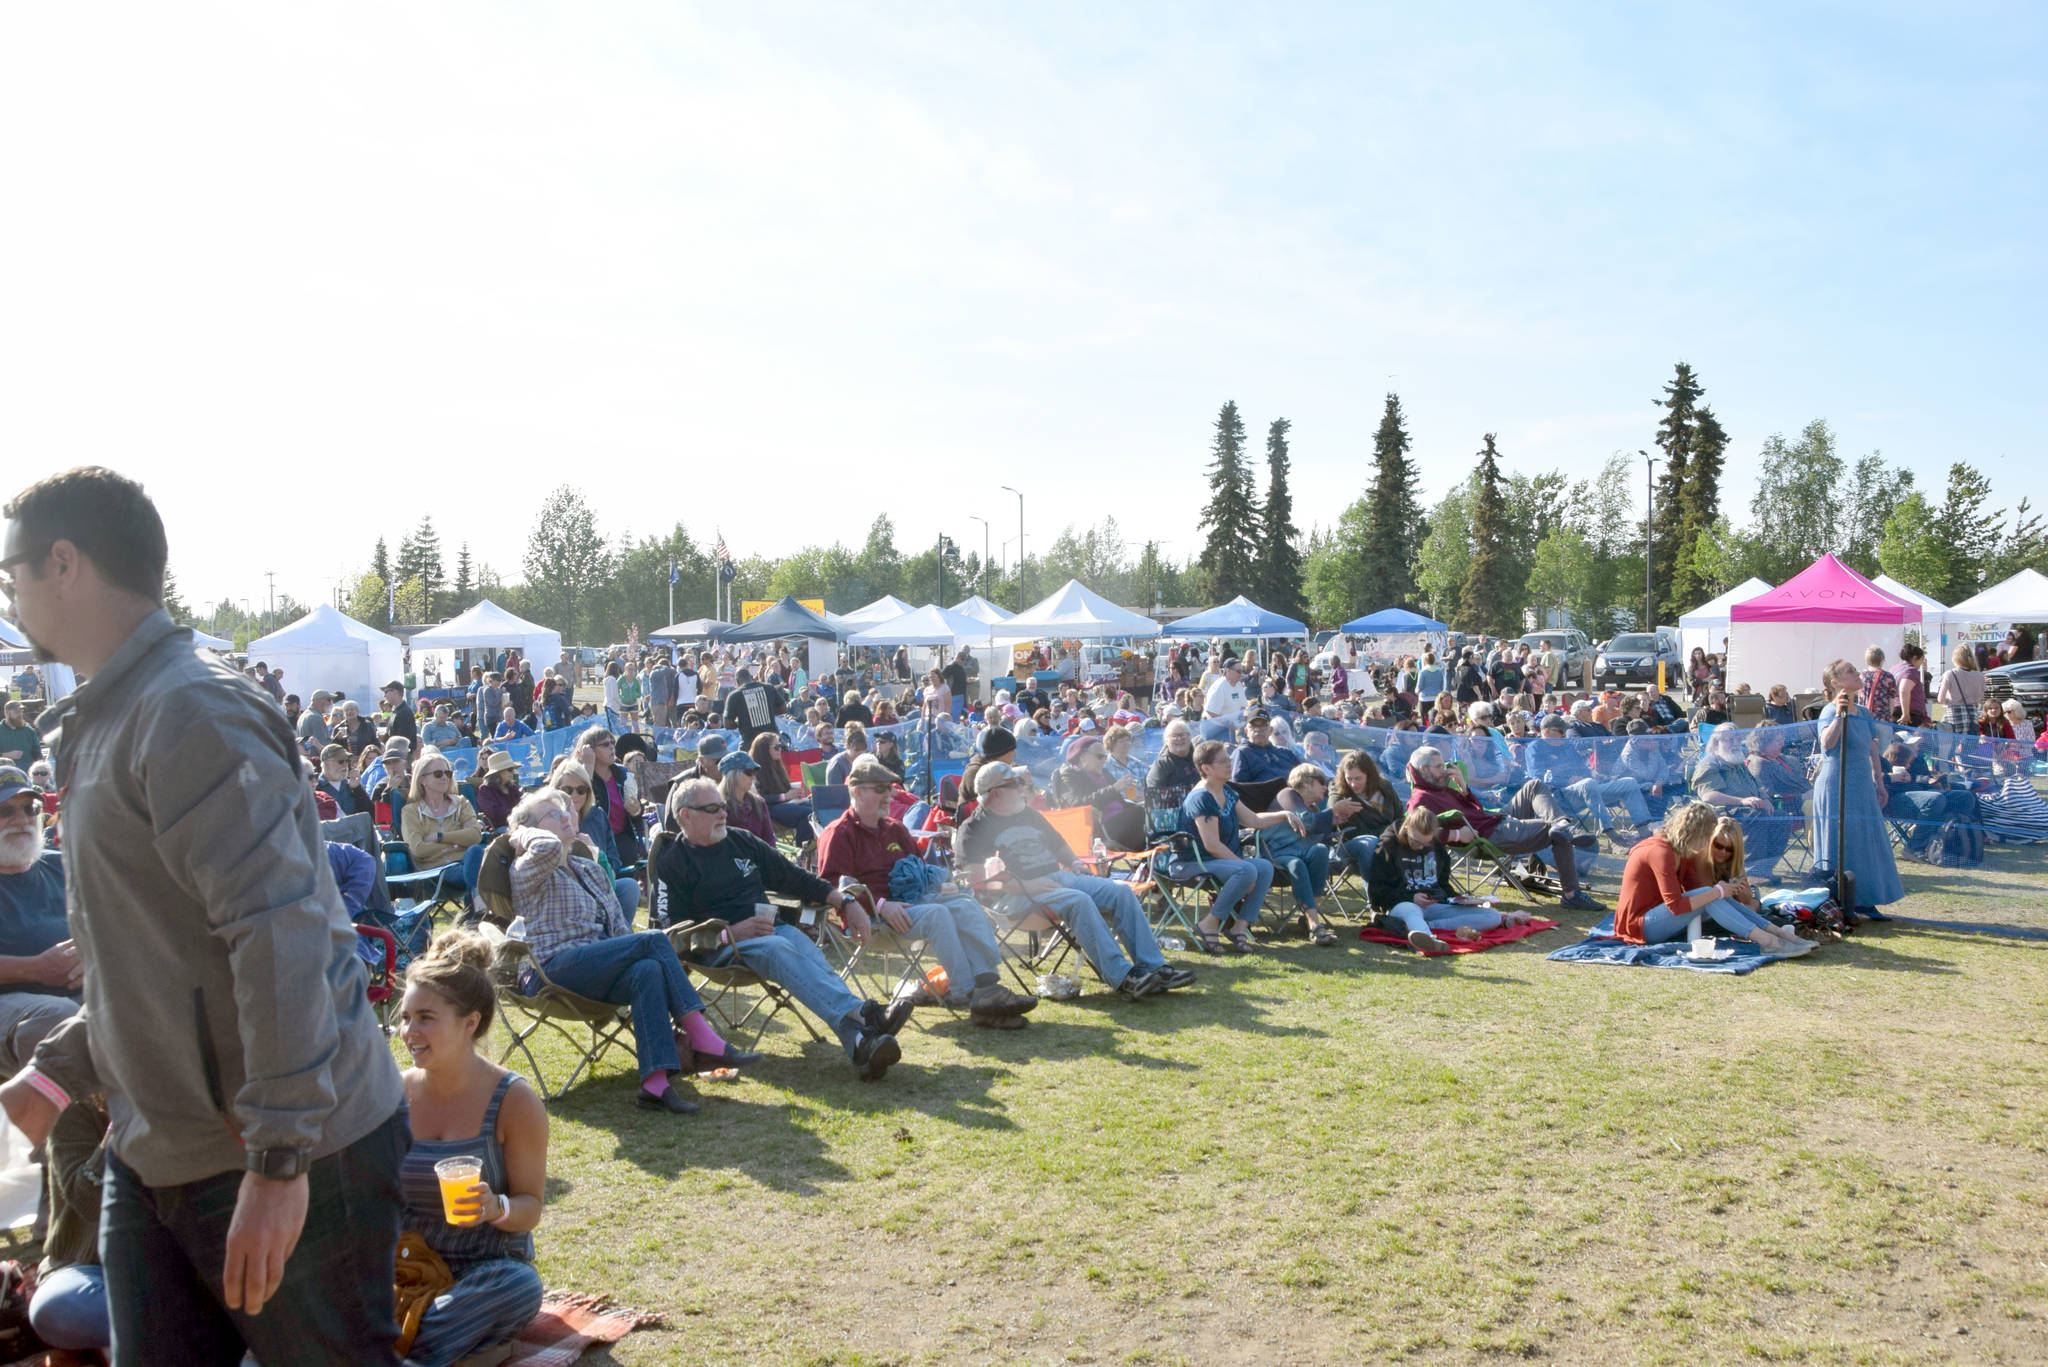 The crowd listens to the music at Soldotna Creek Park during the Levitt AMP Soldotna Music Series on Wednesday, June 12, 2019. (Photo by Brian Mazurek/Peninsula Clarion)